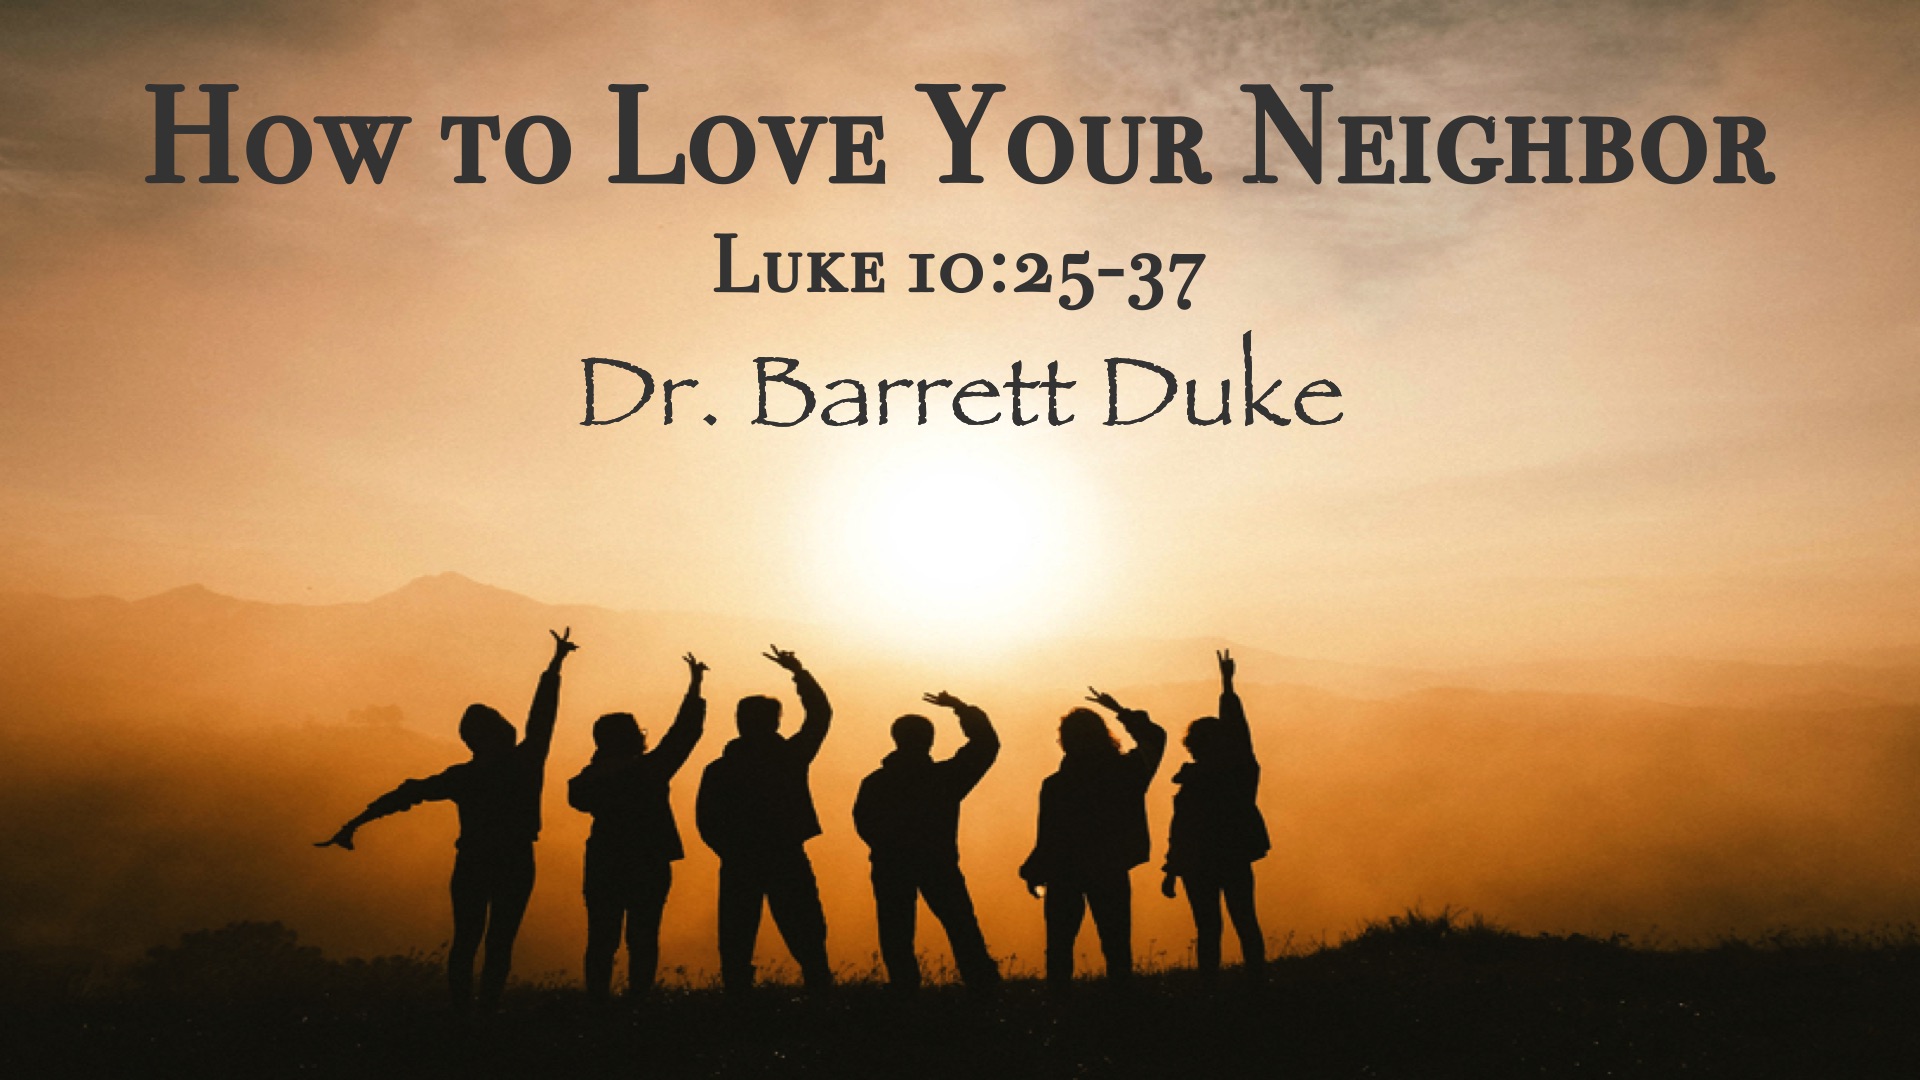 “How to Love Your Neighbor”